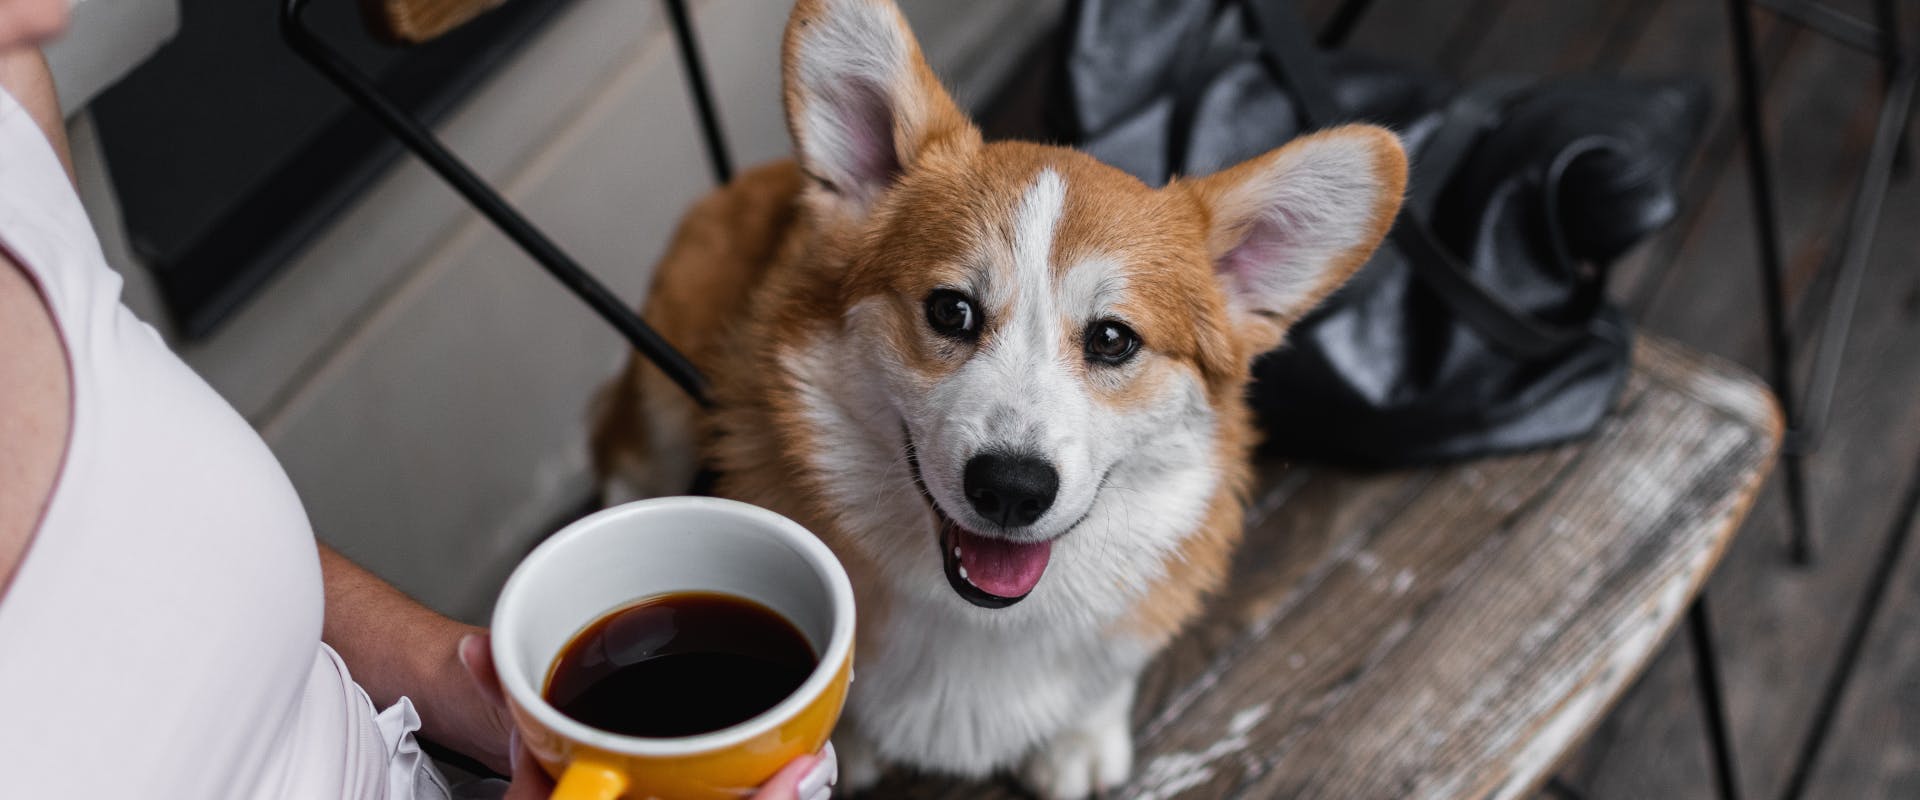 Corgi looking at a cup of coffee.